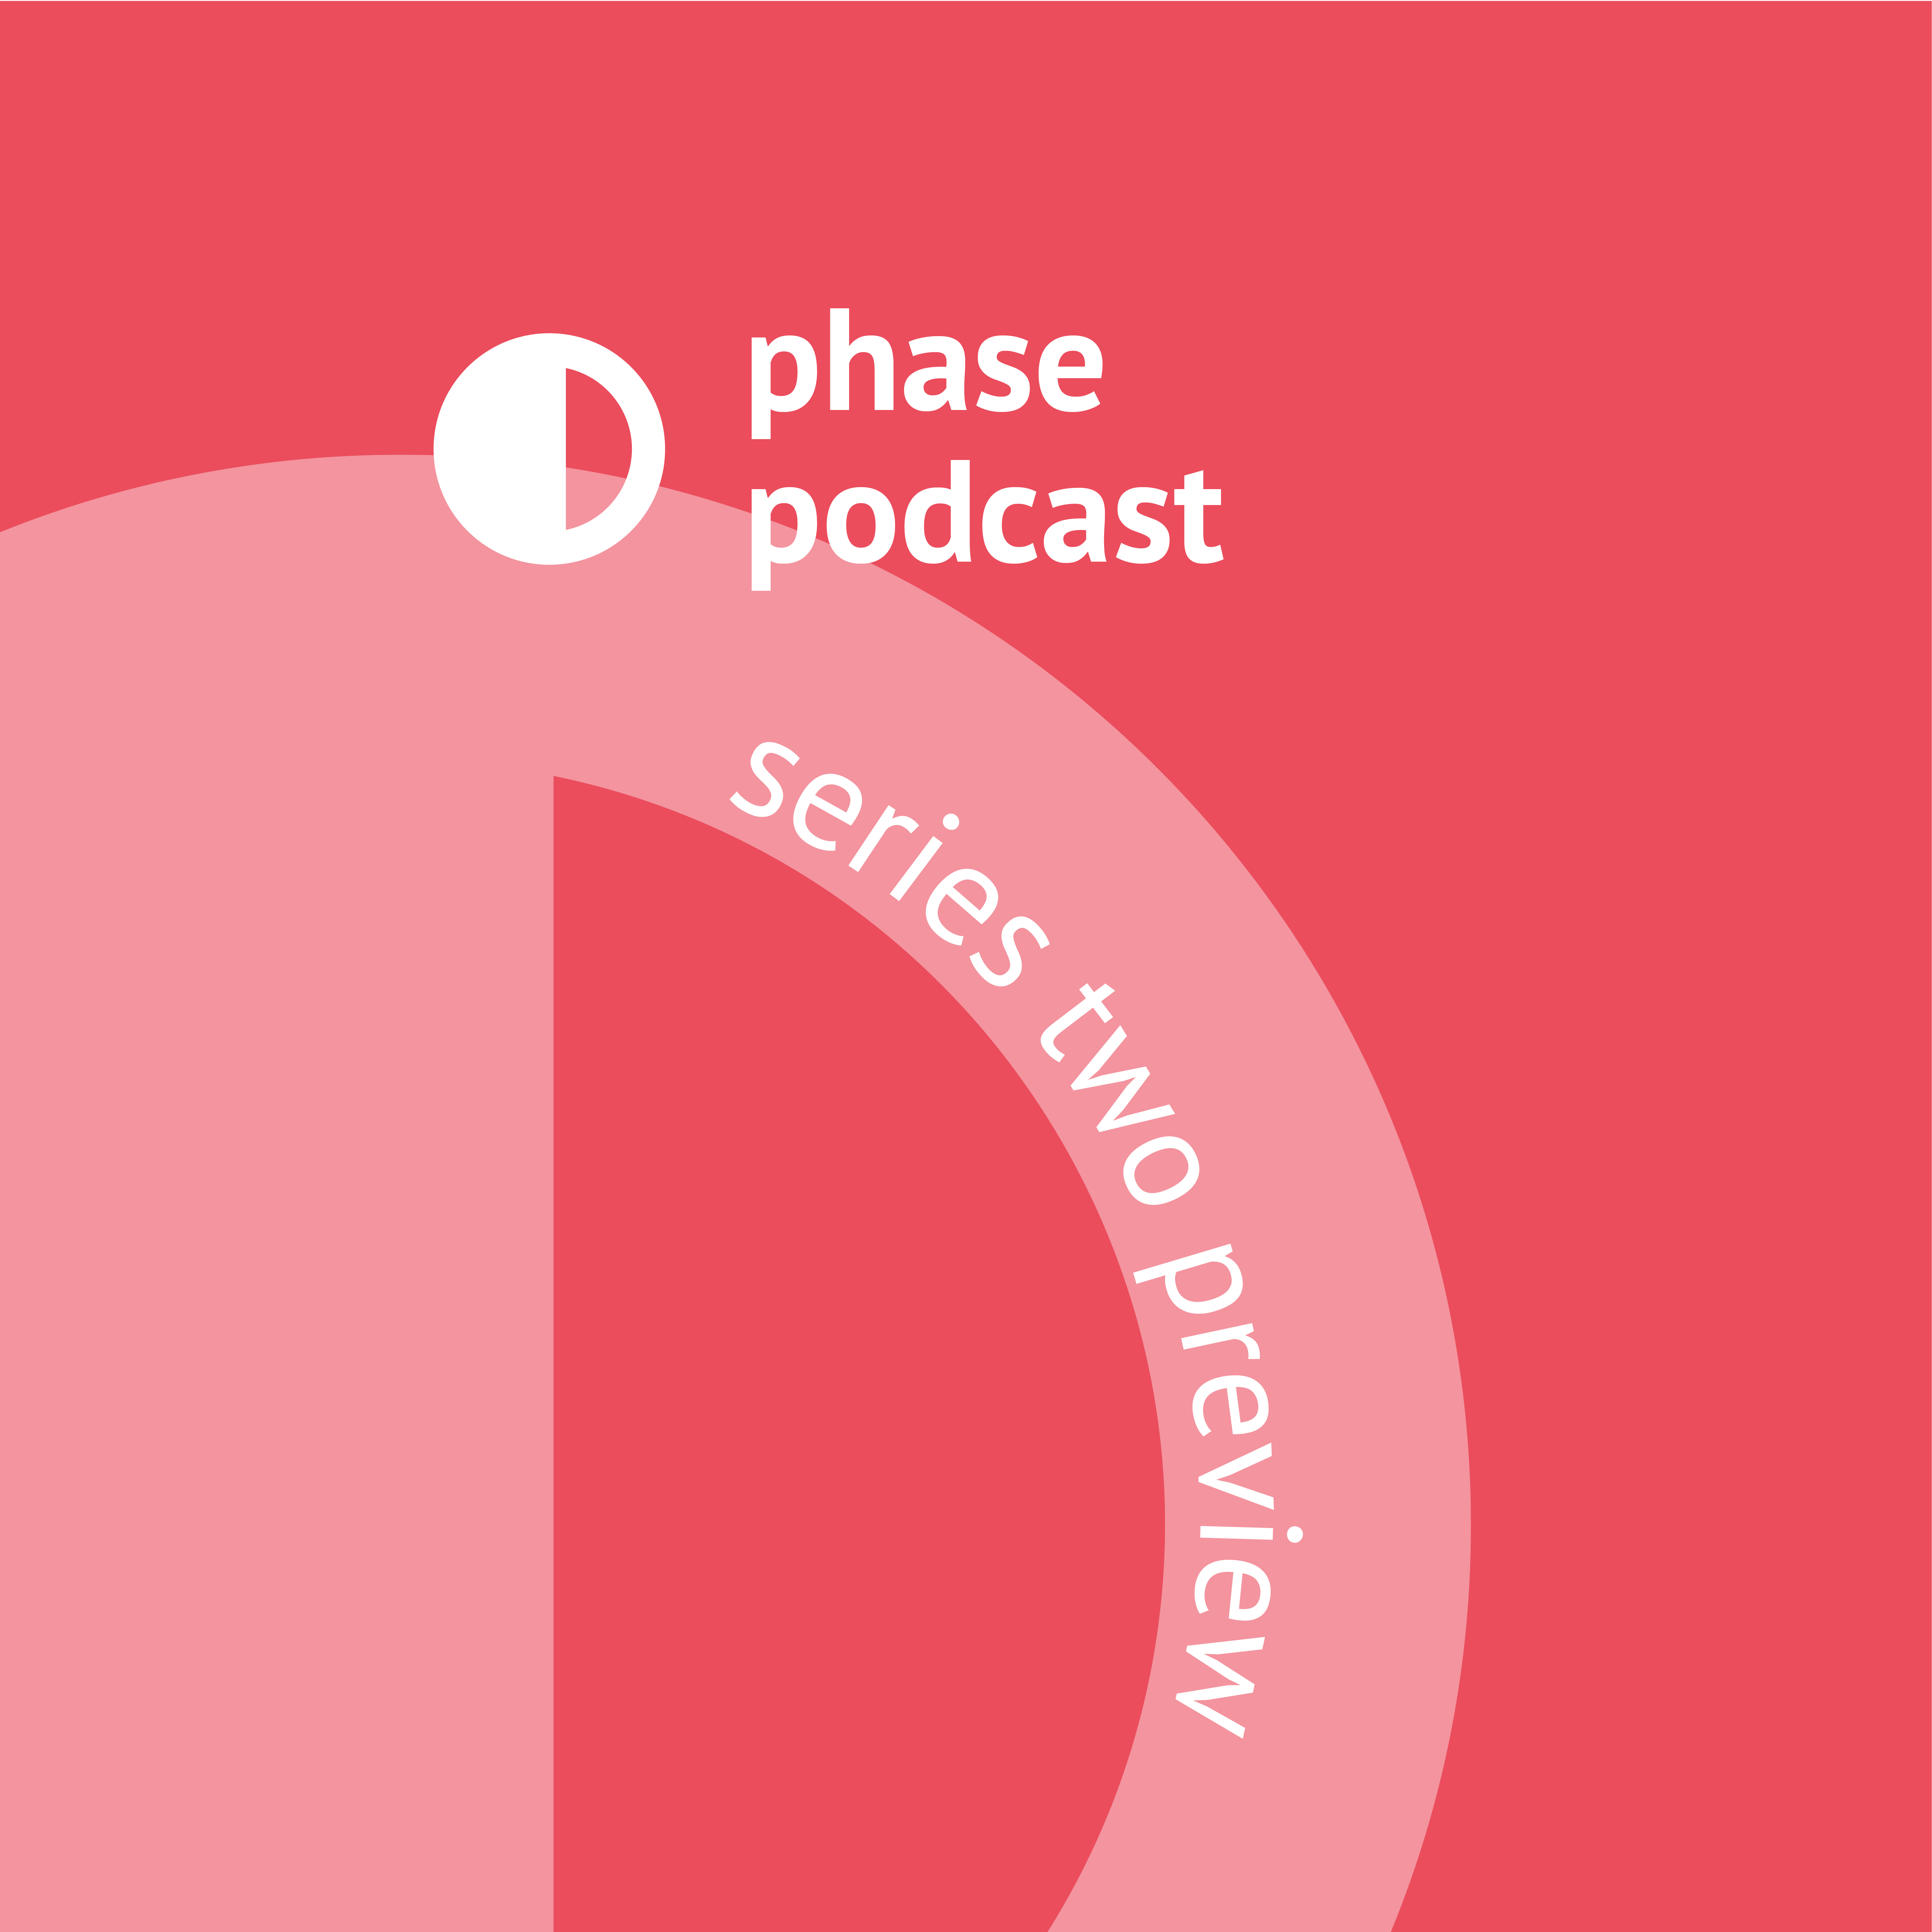 Phase Podcast: Change Creates Change (Series Two Preview)